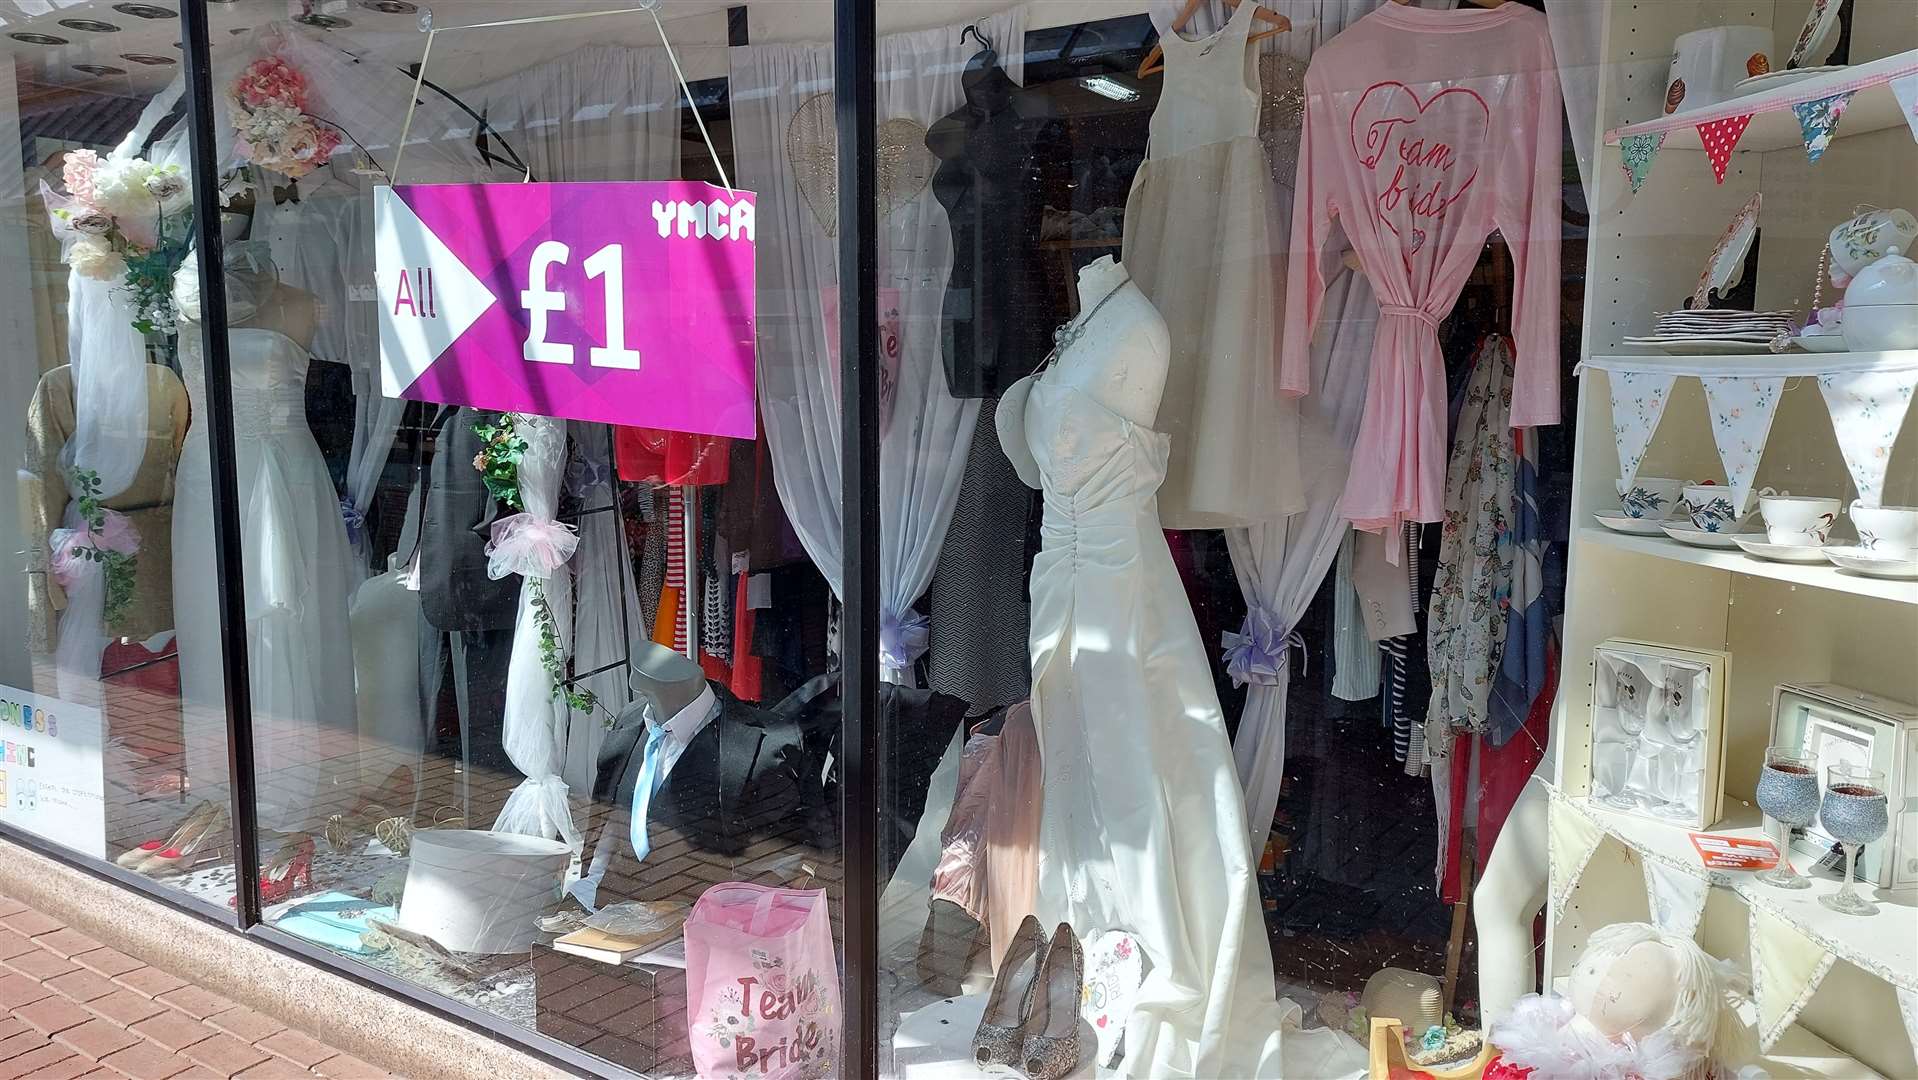 Wedding dresses and designer goods were included in the £1 sale